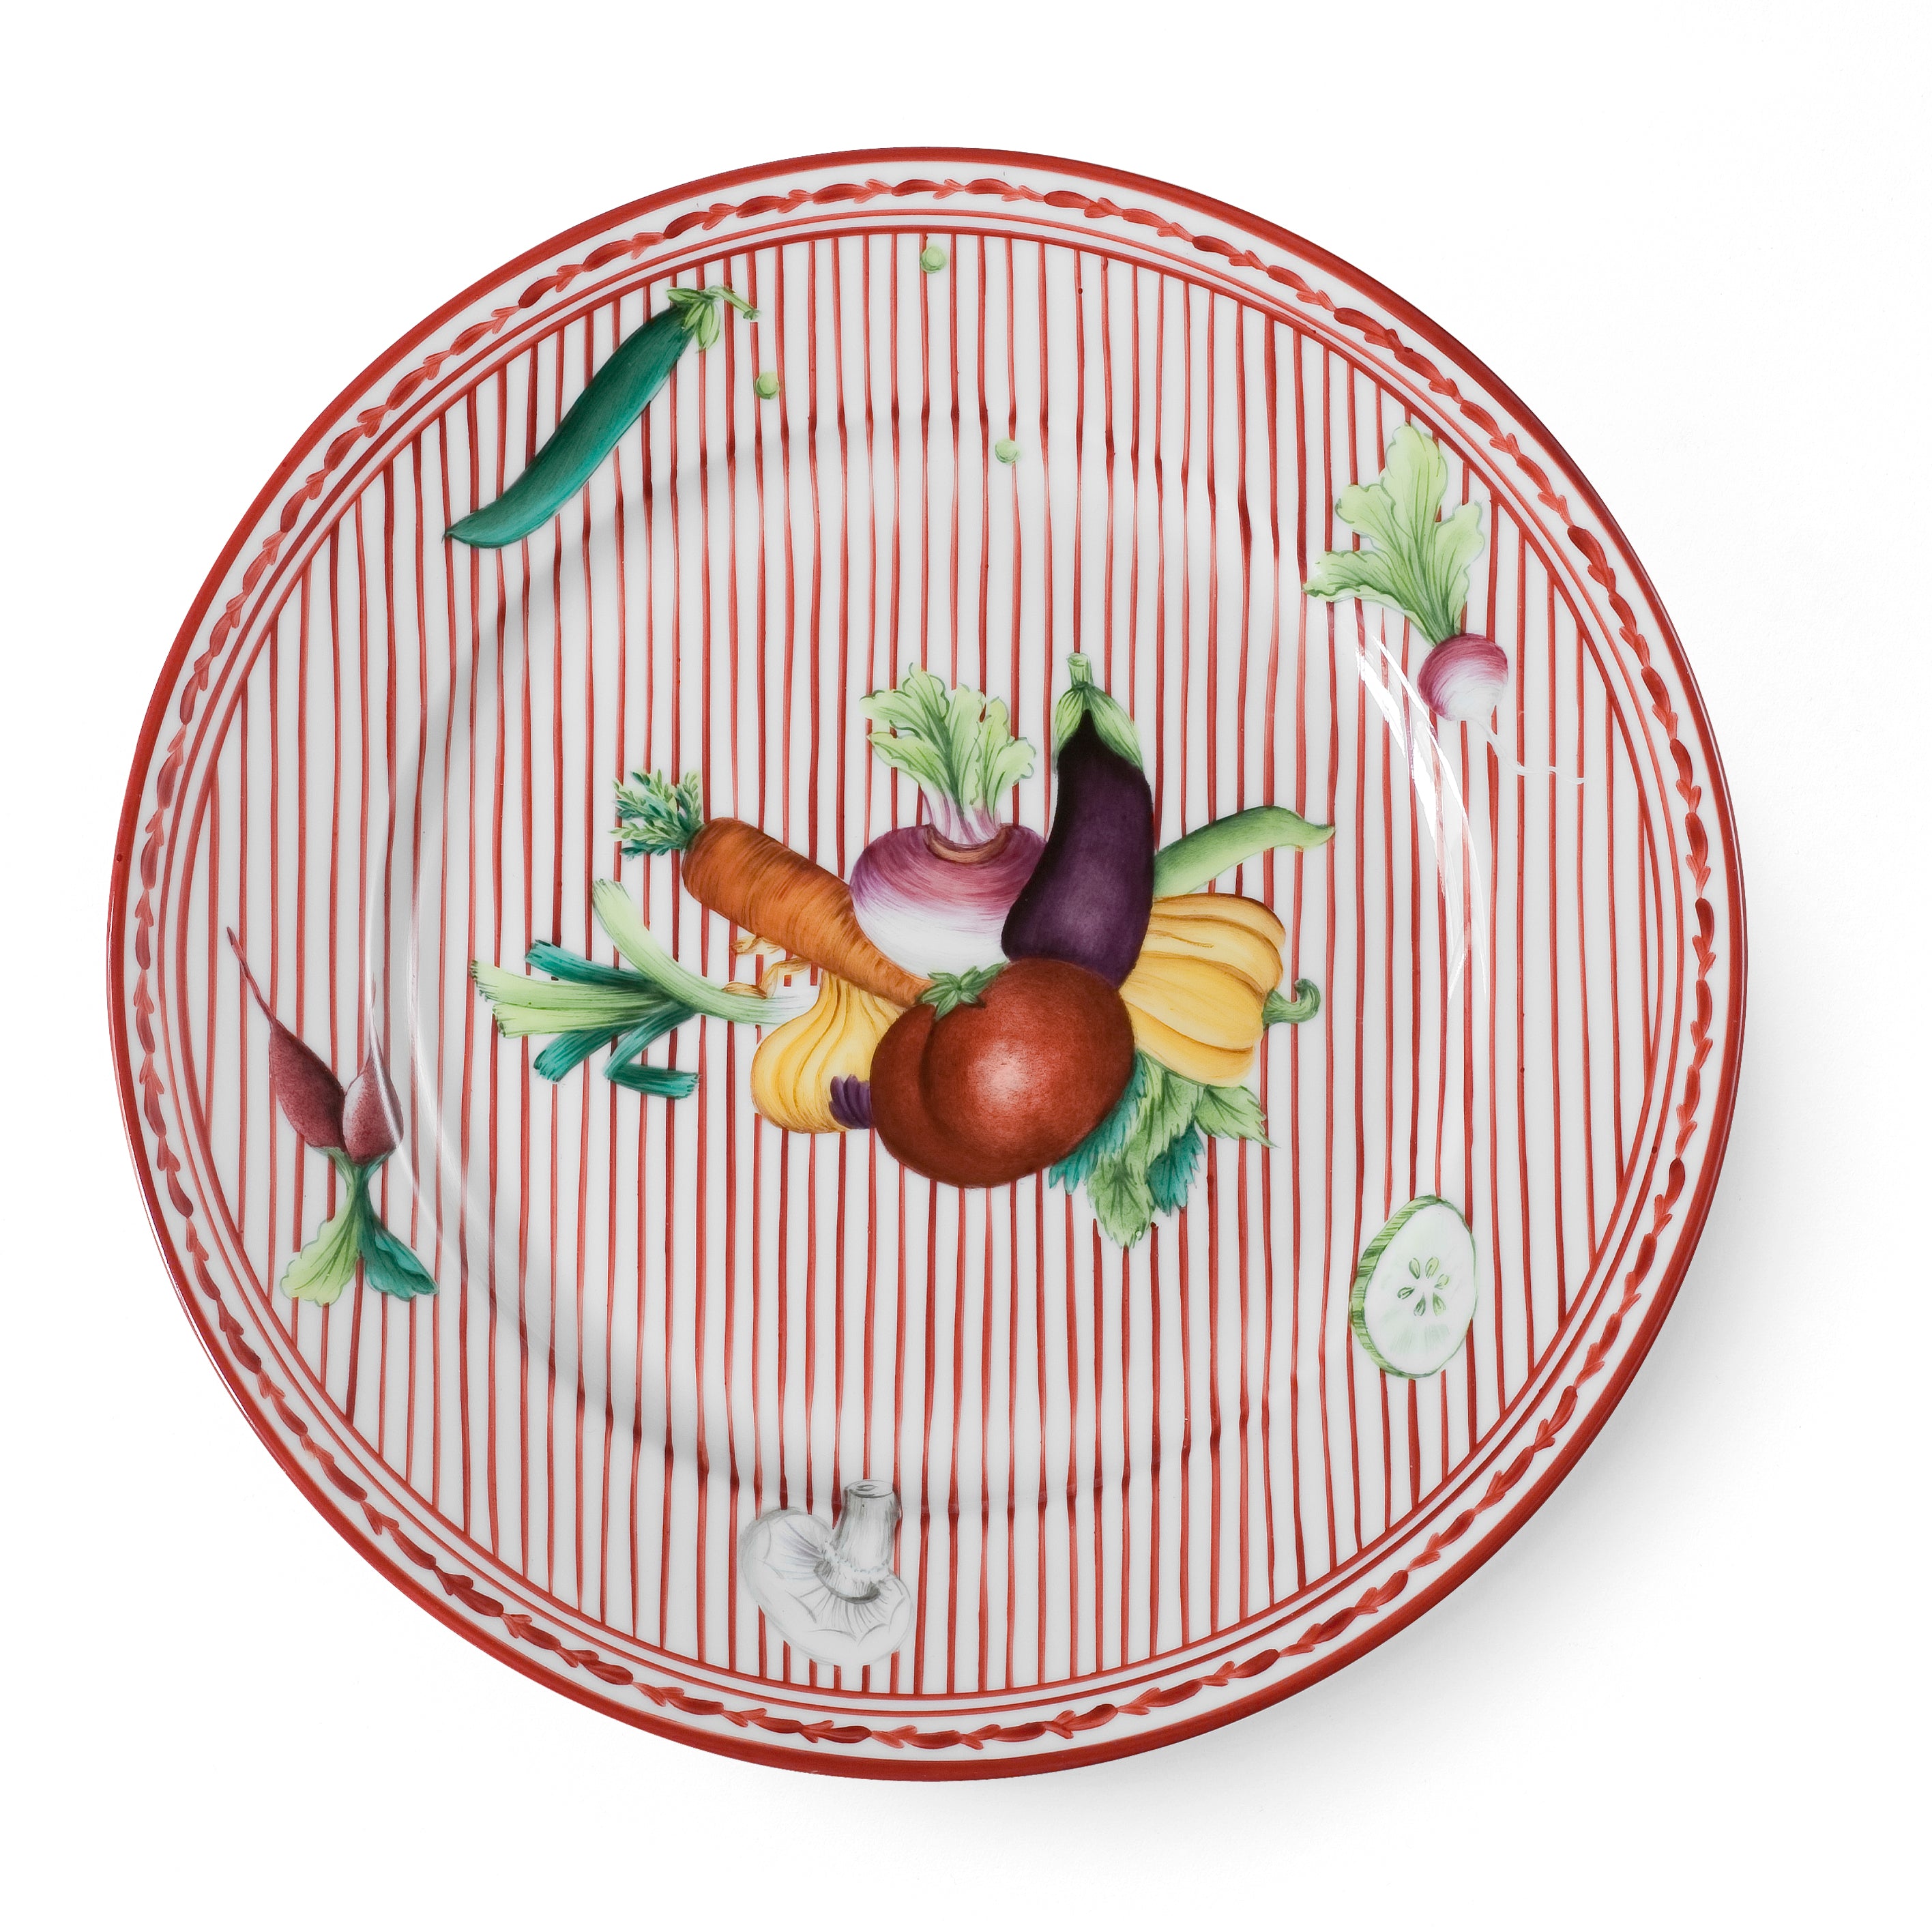 Potager in Red - Dinner plate